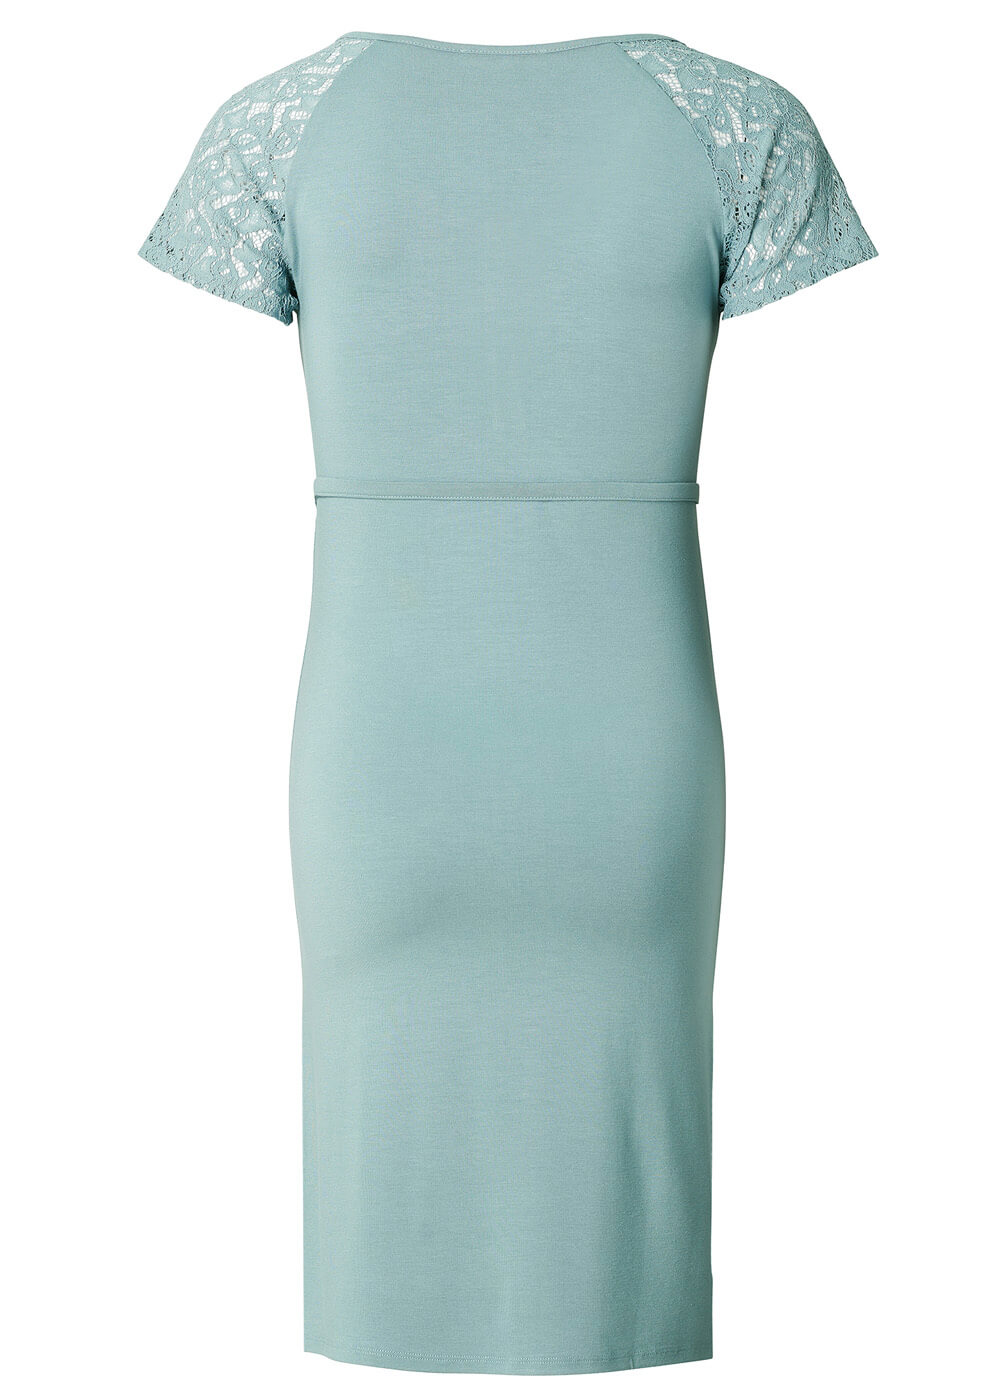 Lace Sleeve Maternity Dress in Hay Green by Esprit